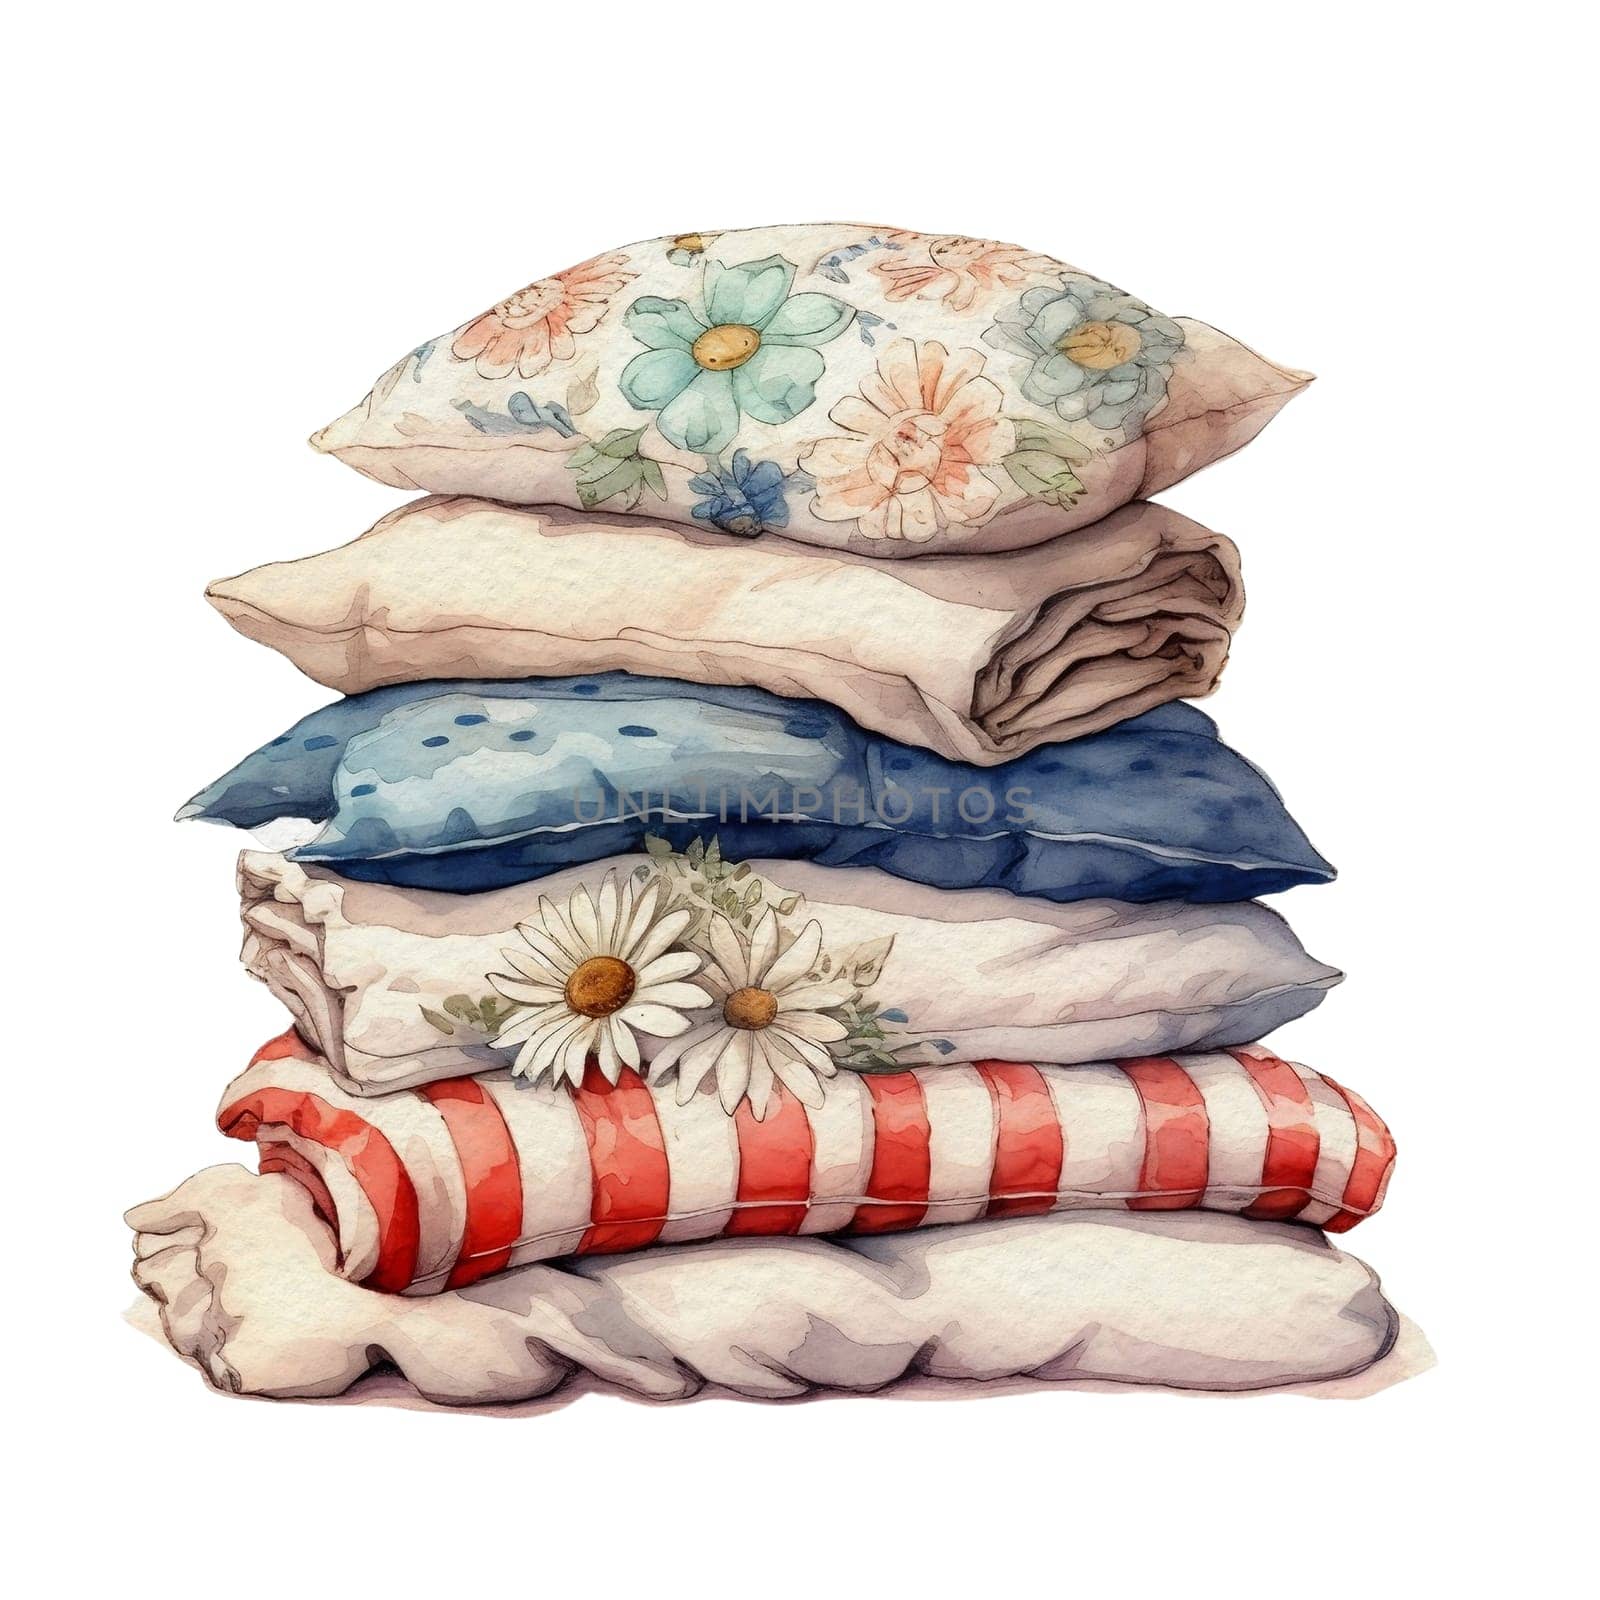 Watercolor 4th of July Independence Day Pile of pillows and blanket Cosy Decoration Illustration Clipart by Skyecreativestudio